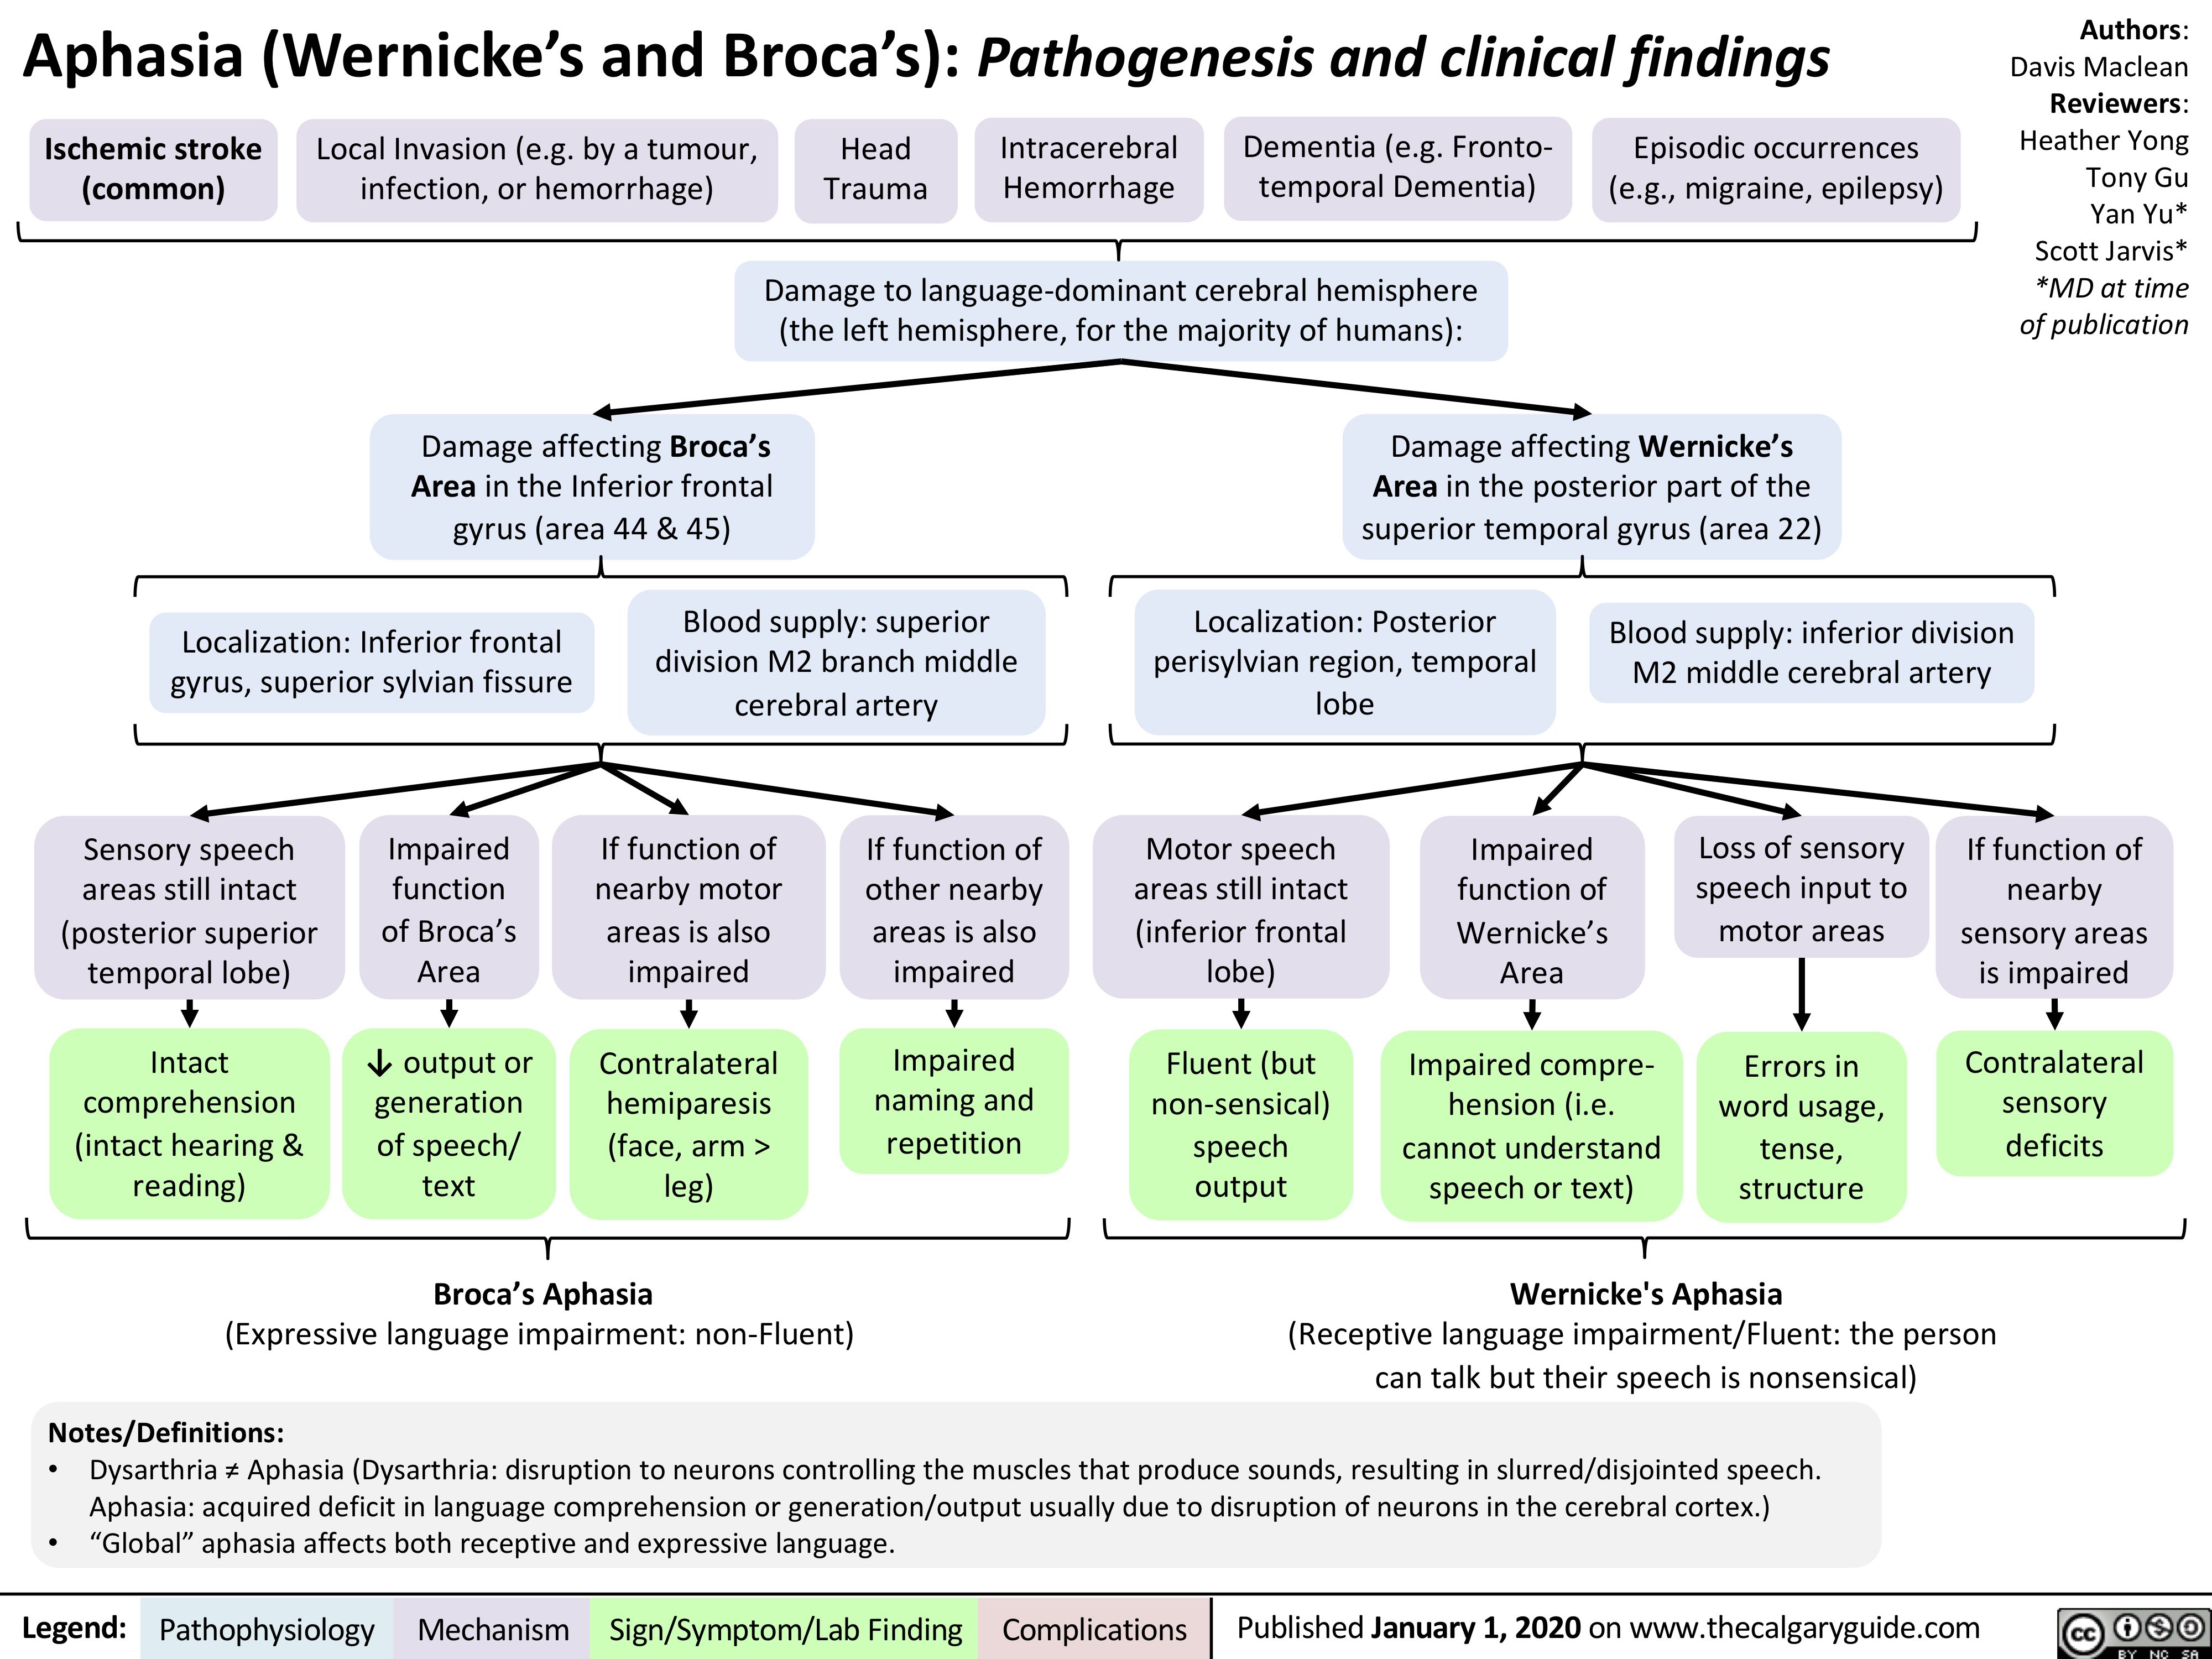 Aphasia (Wernicke’s and Broca’s): Pathogenesis and clinical findings
Authors: Davis Maclean Reviewers: Heather Yong Tony Gu Yan Yu* Scott Jarvis* *MD at time of publication
      Ischemic stroke (common)
Local Invasion (e.g. by a tumour, Head infection, or hemorrhage) Trauma
Intracerebral Hemorrhage
Dementia (e.g. Fronto- temporal Dementia)
Episodic occurrences (e.g., migraine, epilepsy)
  Damage to language-dominant cerebral hemisphere (the left hemisphere, for the majority of humans):
   Damage affecting Broca’s Area in the Inferior frontal gyrus (area 44 & 45)
Damage affecting Wernicke’s Area in the posterior part of the superior temporal gyrus (area 22)
      Localization: Inferior frontal gyrus, superior sylvian fissure
Blood supply: superior division M2 branch middle cerebral artery
Localization: Posterior perisylvian region, temporal lobe
Blood supply: inferior division M2 middle cerebral artery
             Sensory speech
areas still intact (posterior superior temporal lobe)
Intact comprehension (intact hearing & reading)
Impaired function of Broca’s Area
↓ output or generation of speech/ text
If function of nearby motor areas is also impaired
Contralateral hemiparesis (face, arm > leg)
If function of other nearby areas is also impaired
Impaired naming and repetition
Motor speech areas still intact (inferior frontal lobe)
Fluent (but non-sensical) speech output
Impaired function of Wernicke’s Area
Impaired compre- hension (i.e. cannot understand speech or text)
Loss of sensory speech input to motor areas
Errors in word usage, tense, structure
If function of nearby sensory areas is impaired
Contralateral sensory deficits
                  Broca’s Aphasia
Wernicke's Aphasia
(Expressive language impairment: non-Fluent)
Notes/Definitions:
(Receptive language impairment/Fluent: the person can talk but their speech is nonsensical)
 • Dysarthria ≠ Aphasia (Dysarthria: disruption to neurons controlling the muscles that produce sounds, resulting in slurred/disjointed speech. Aphasia: acquired deficit in language comprehension or generation/output usually due to disruption of neurons in the cerebral cortex.)
• “Global” aphasia affects both receptive and expressive language.
 Legend:
 Pathophysiology
 Mechanism
Sign/Symptom/Lab Finding
  Complications
Published January 1, 2020 on www.thecalgaryguide.com
   